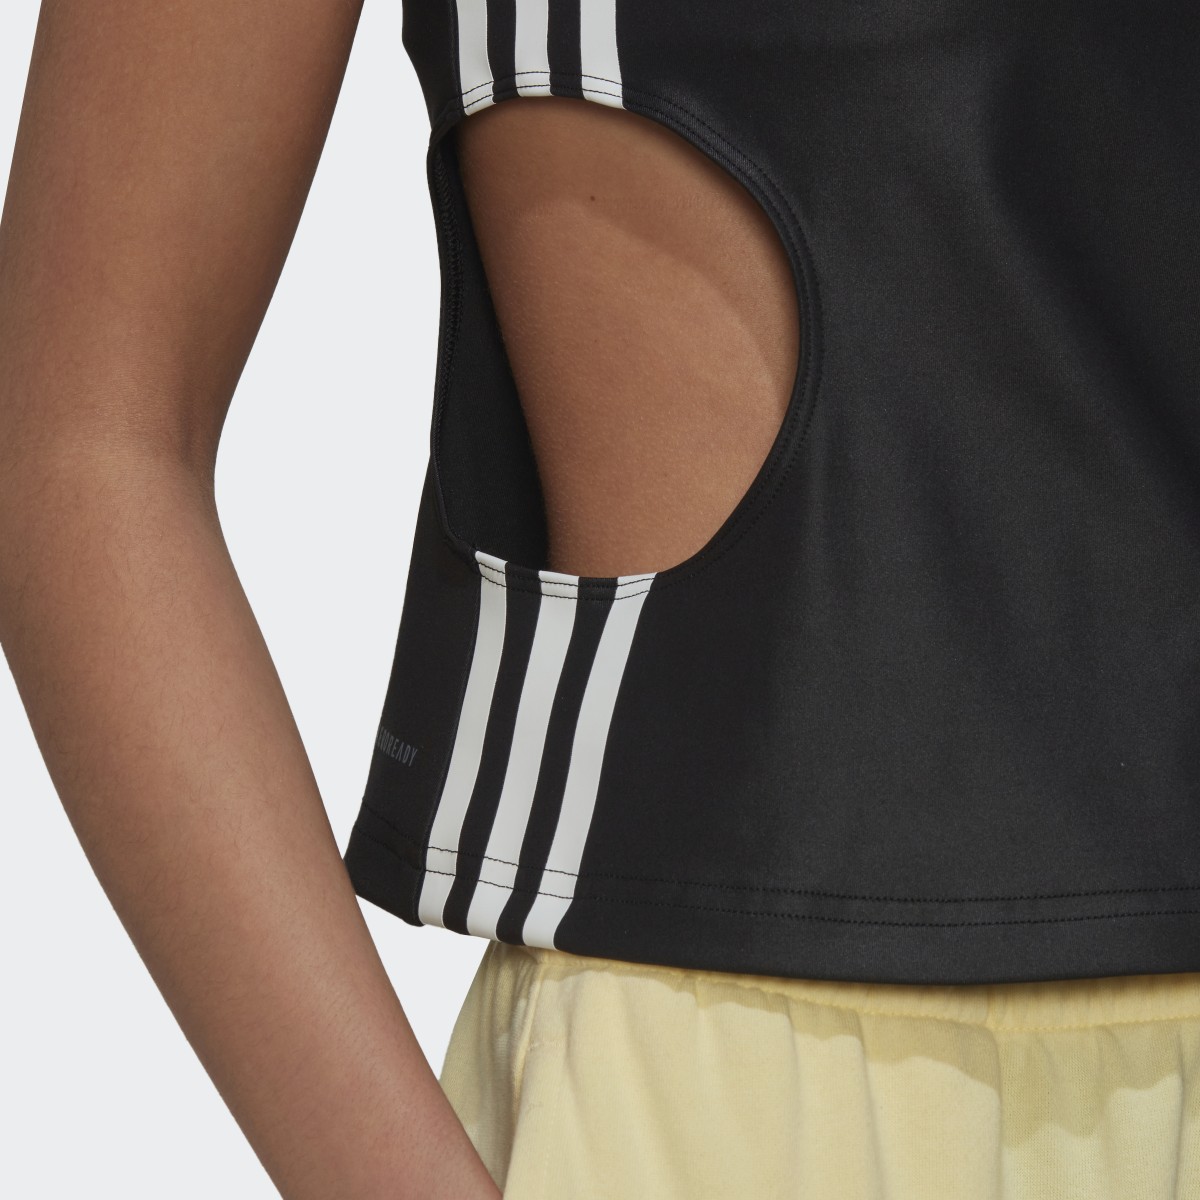 Adidas Hyperglam Fitted Tank Top With Cutout Detail. 9